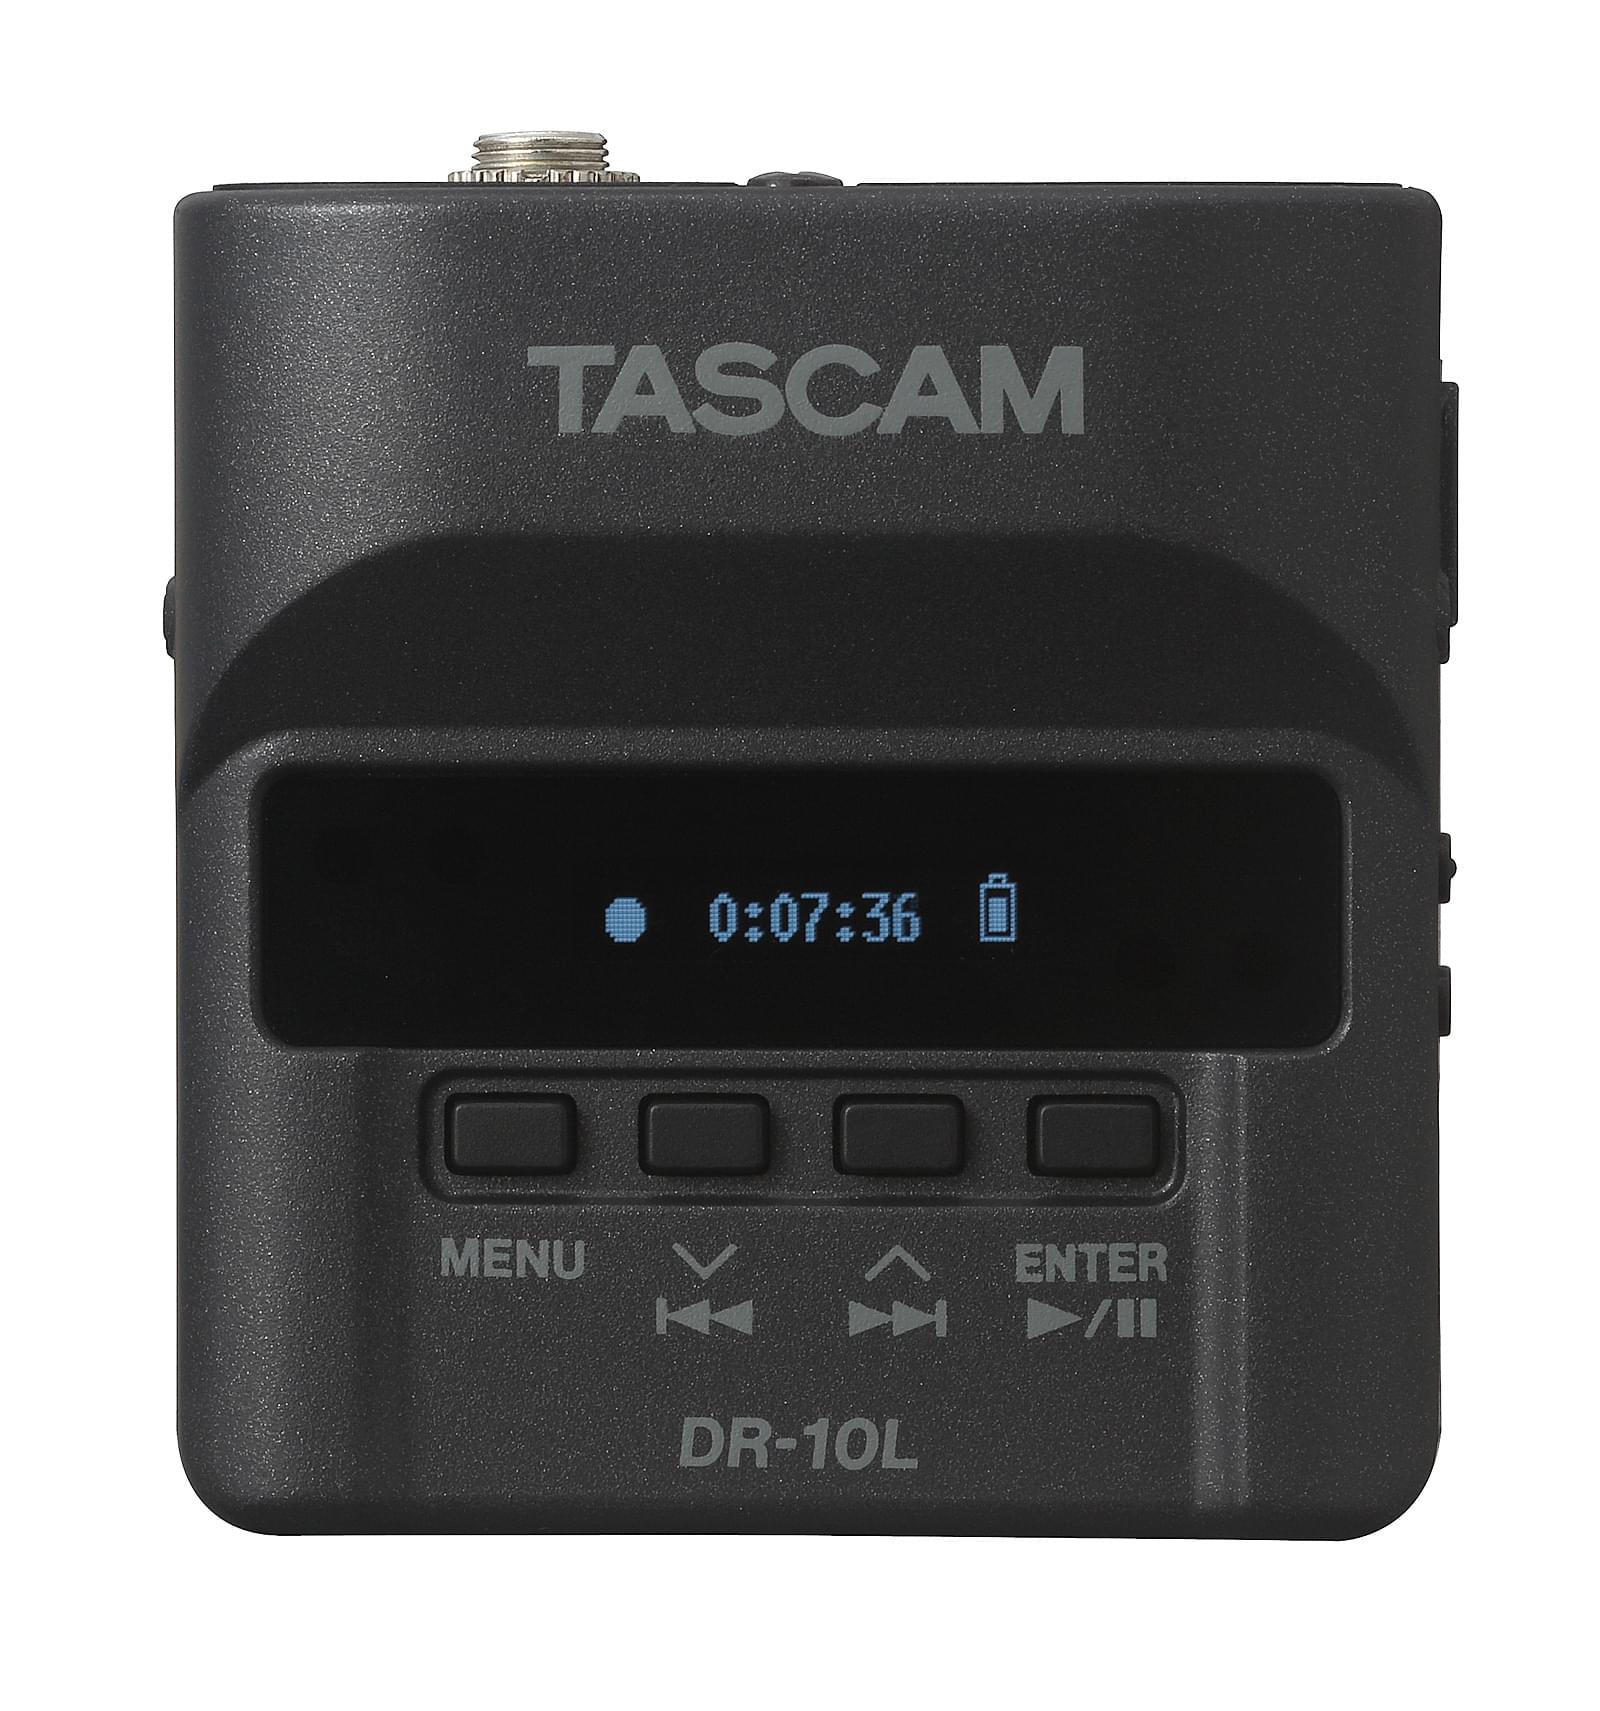 Tascam DR-10L Digital Audio Recorder with Lavalier Microphone - Black